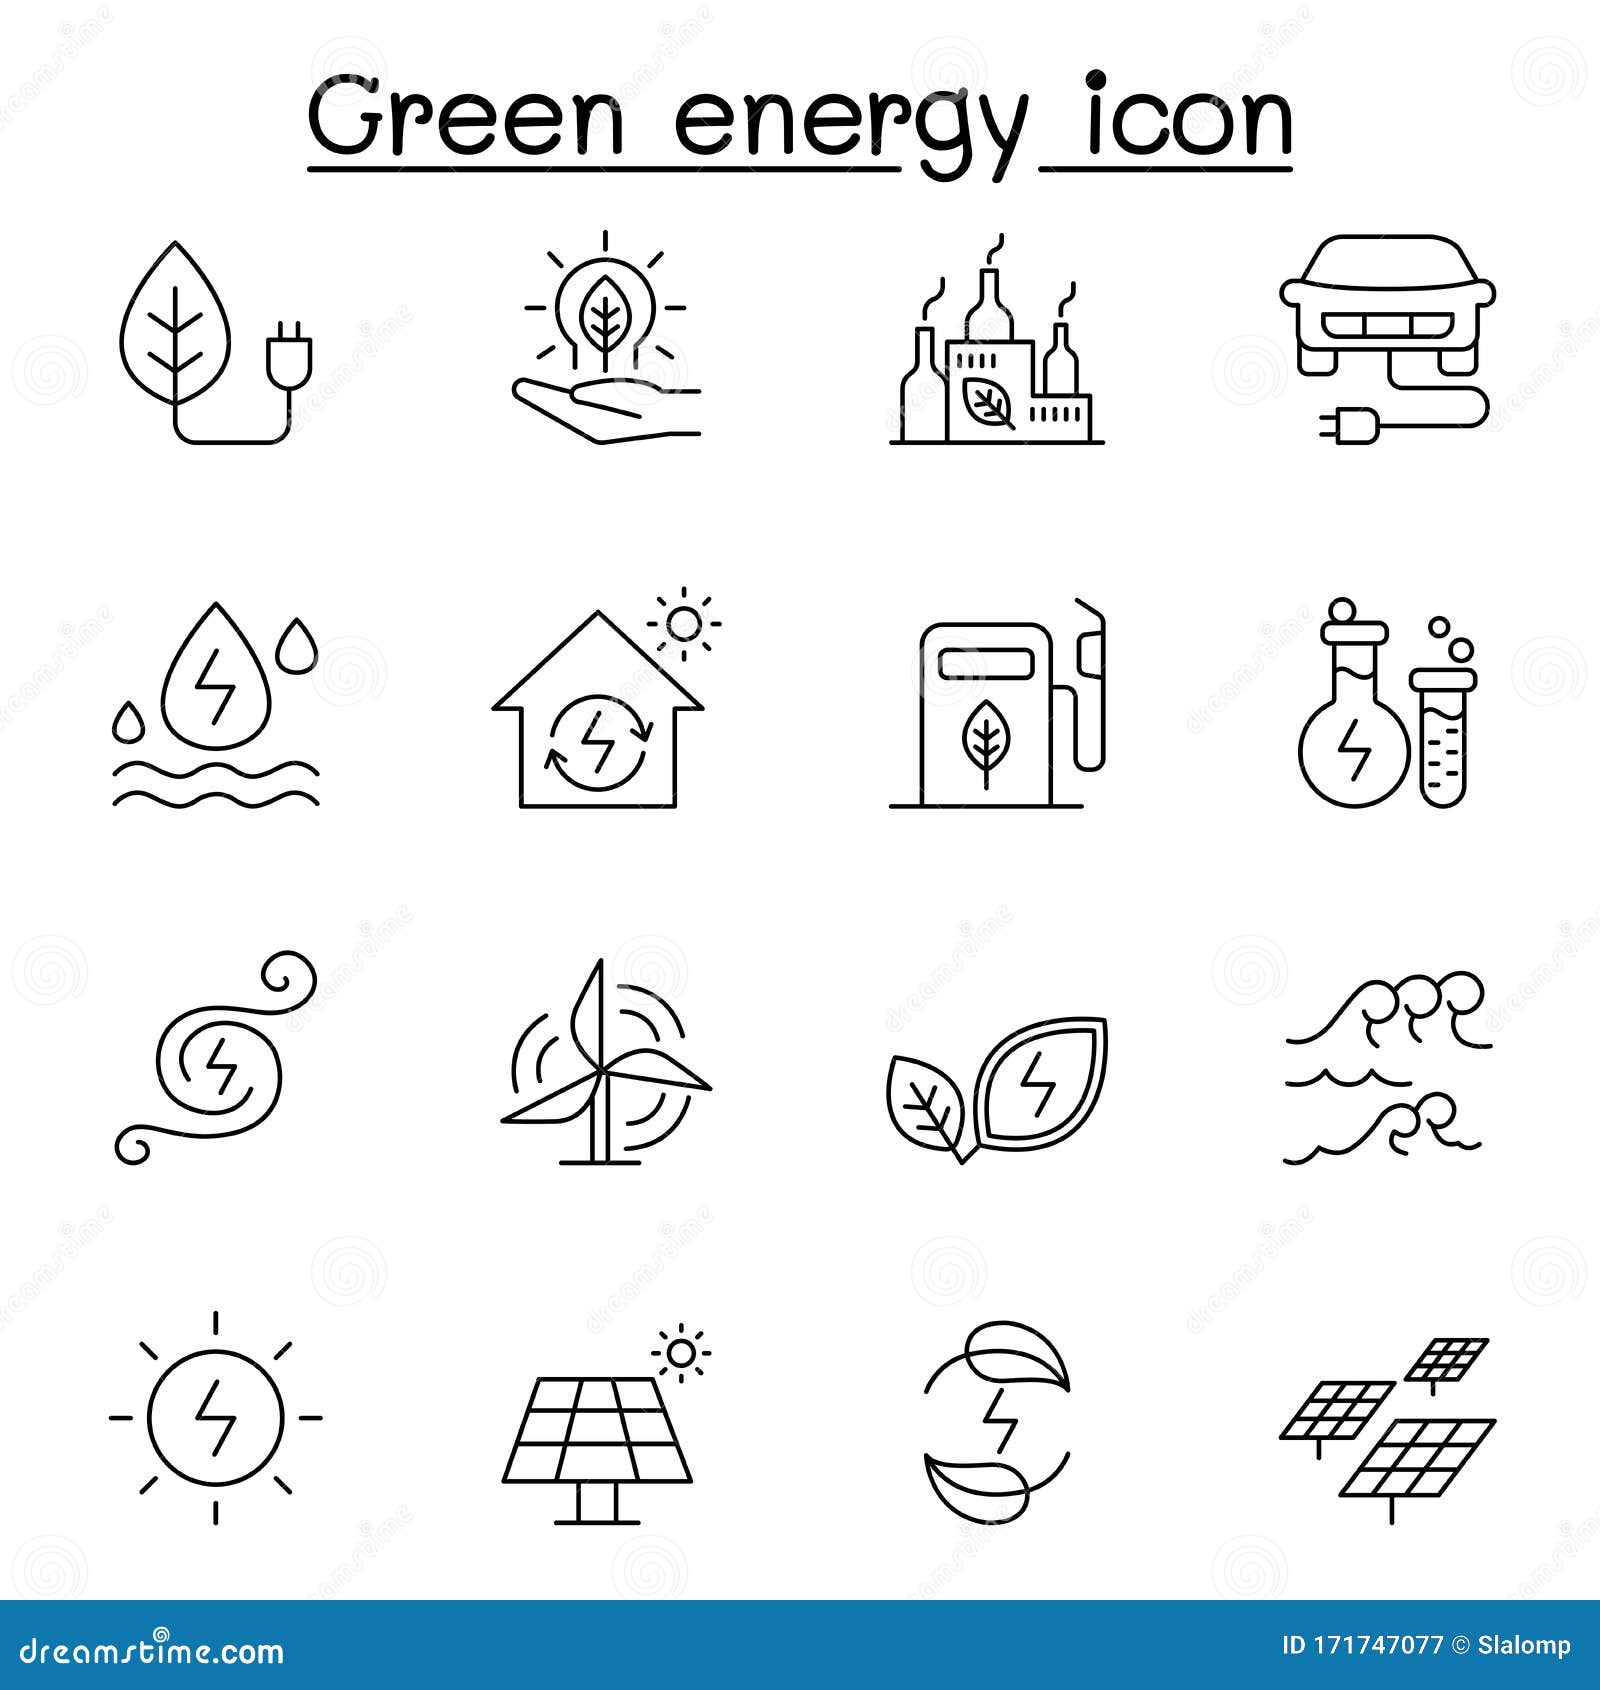 green energy icon set in thin line style